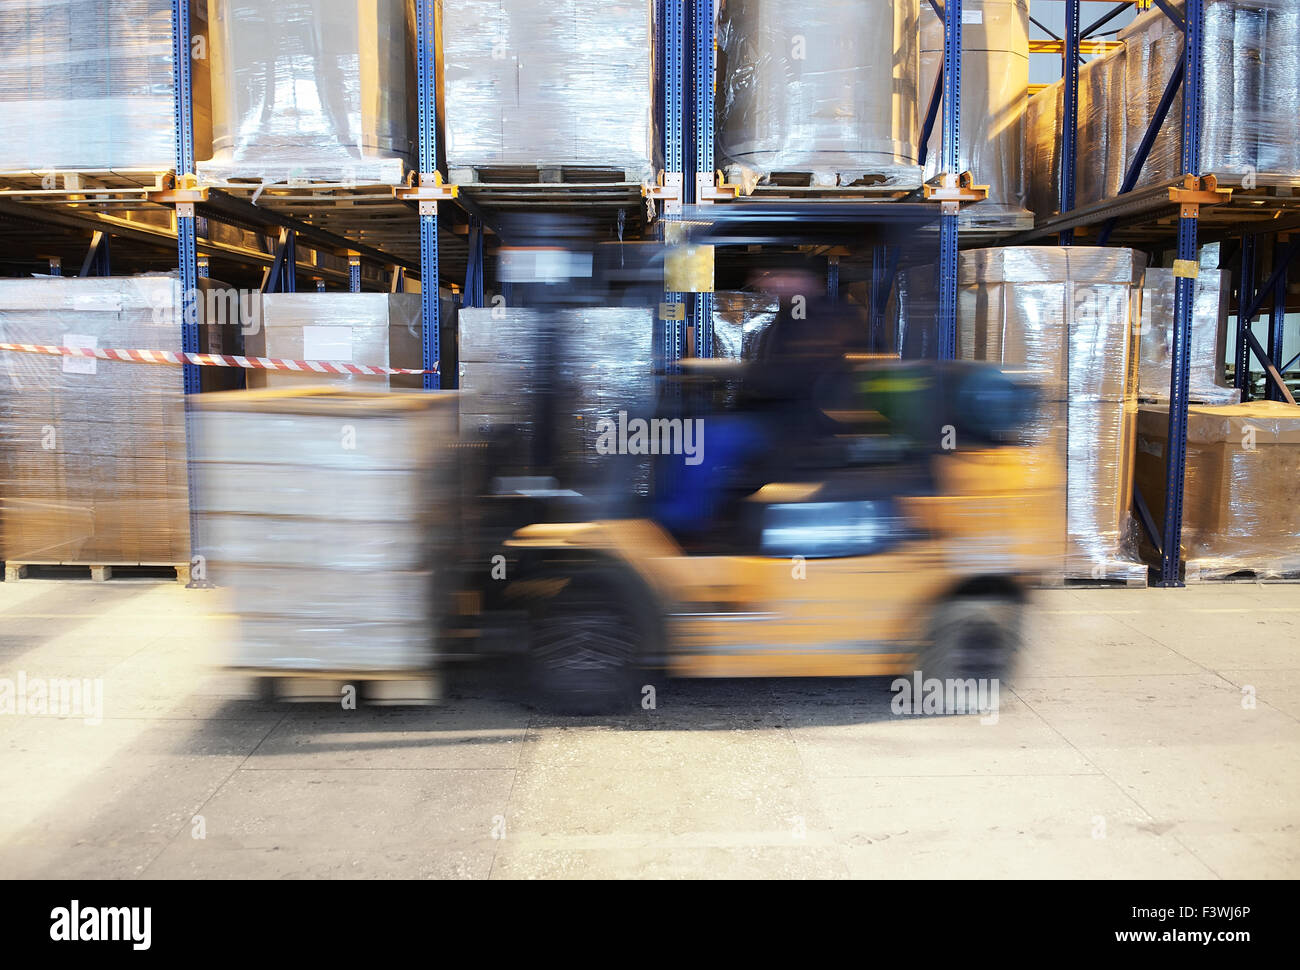 forklift in motion at warehouse Stock Photo